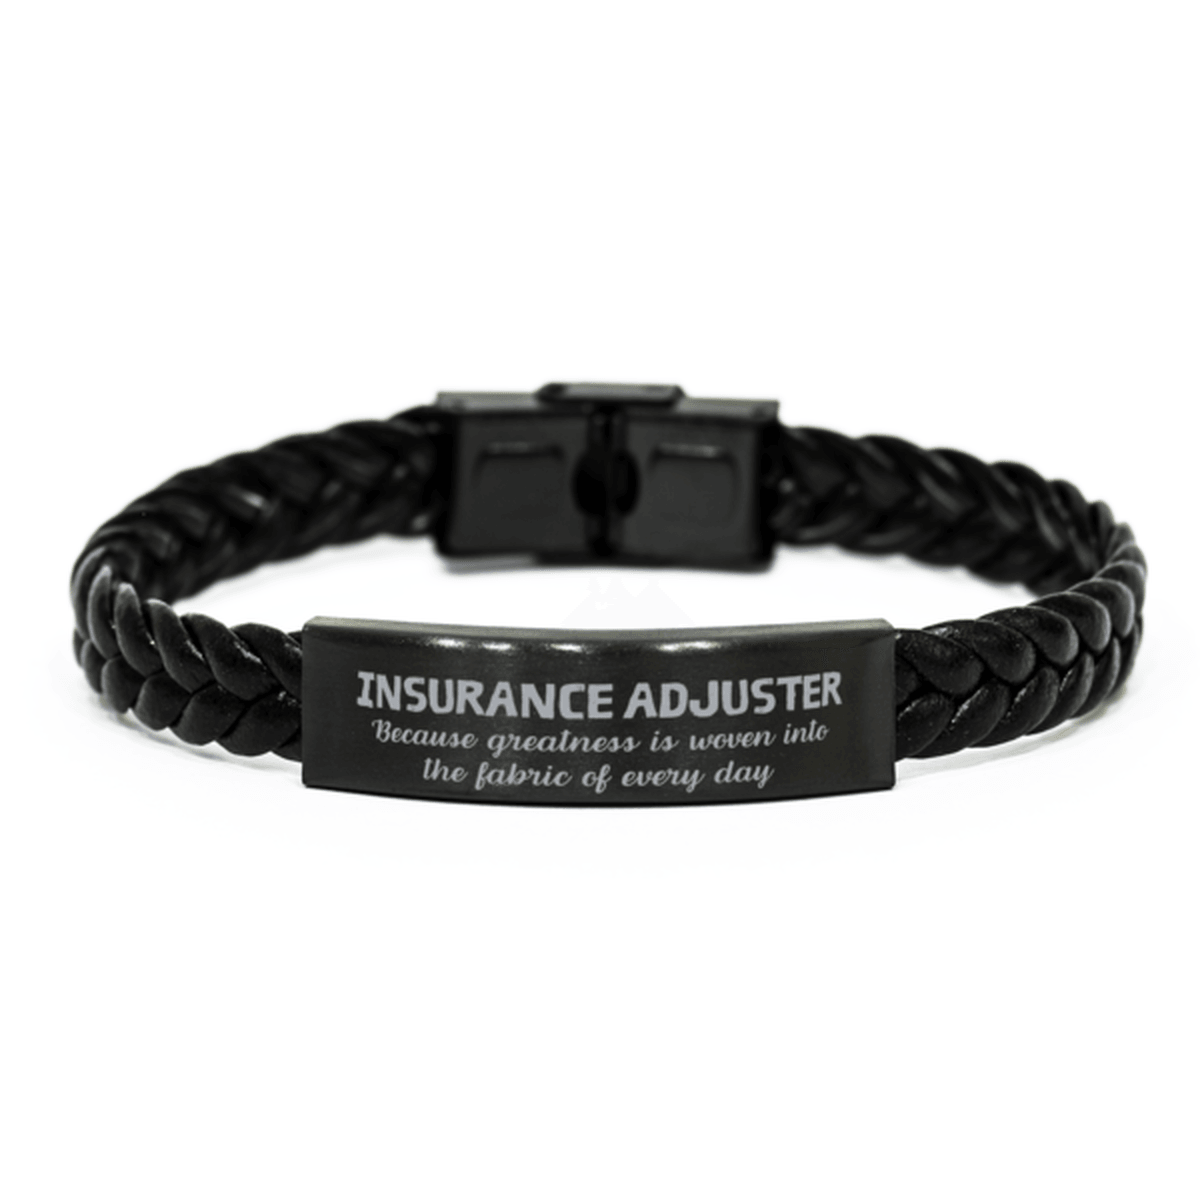 Sarcastic Insurance Adjuster Braided Leather Bracelet Gifts, Christmas Holiday Gifts for Insurance Adjuster Birthday, Insurance Adjuster: Because greatness is woven into the fabric of every day, Coworkers, Friends - Mallard Moon Gift Shop